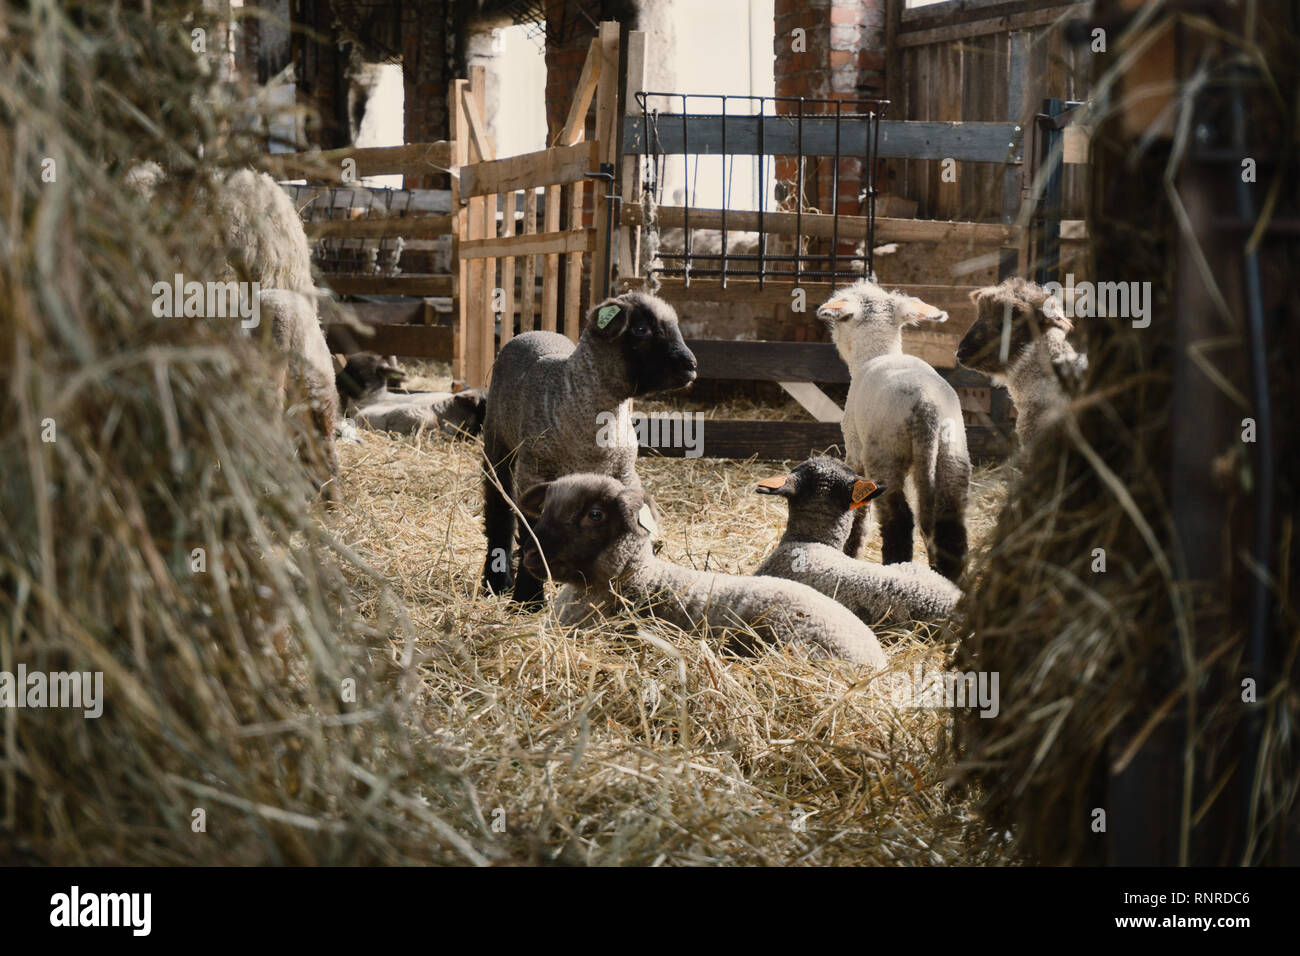 Small sheep shed full of baby sheeps in countryside Stock Photo